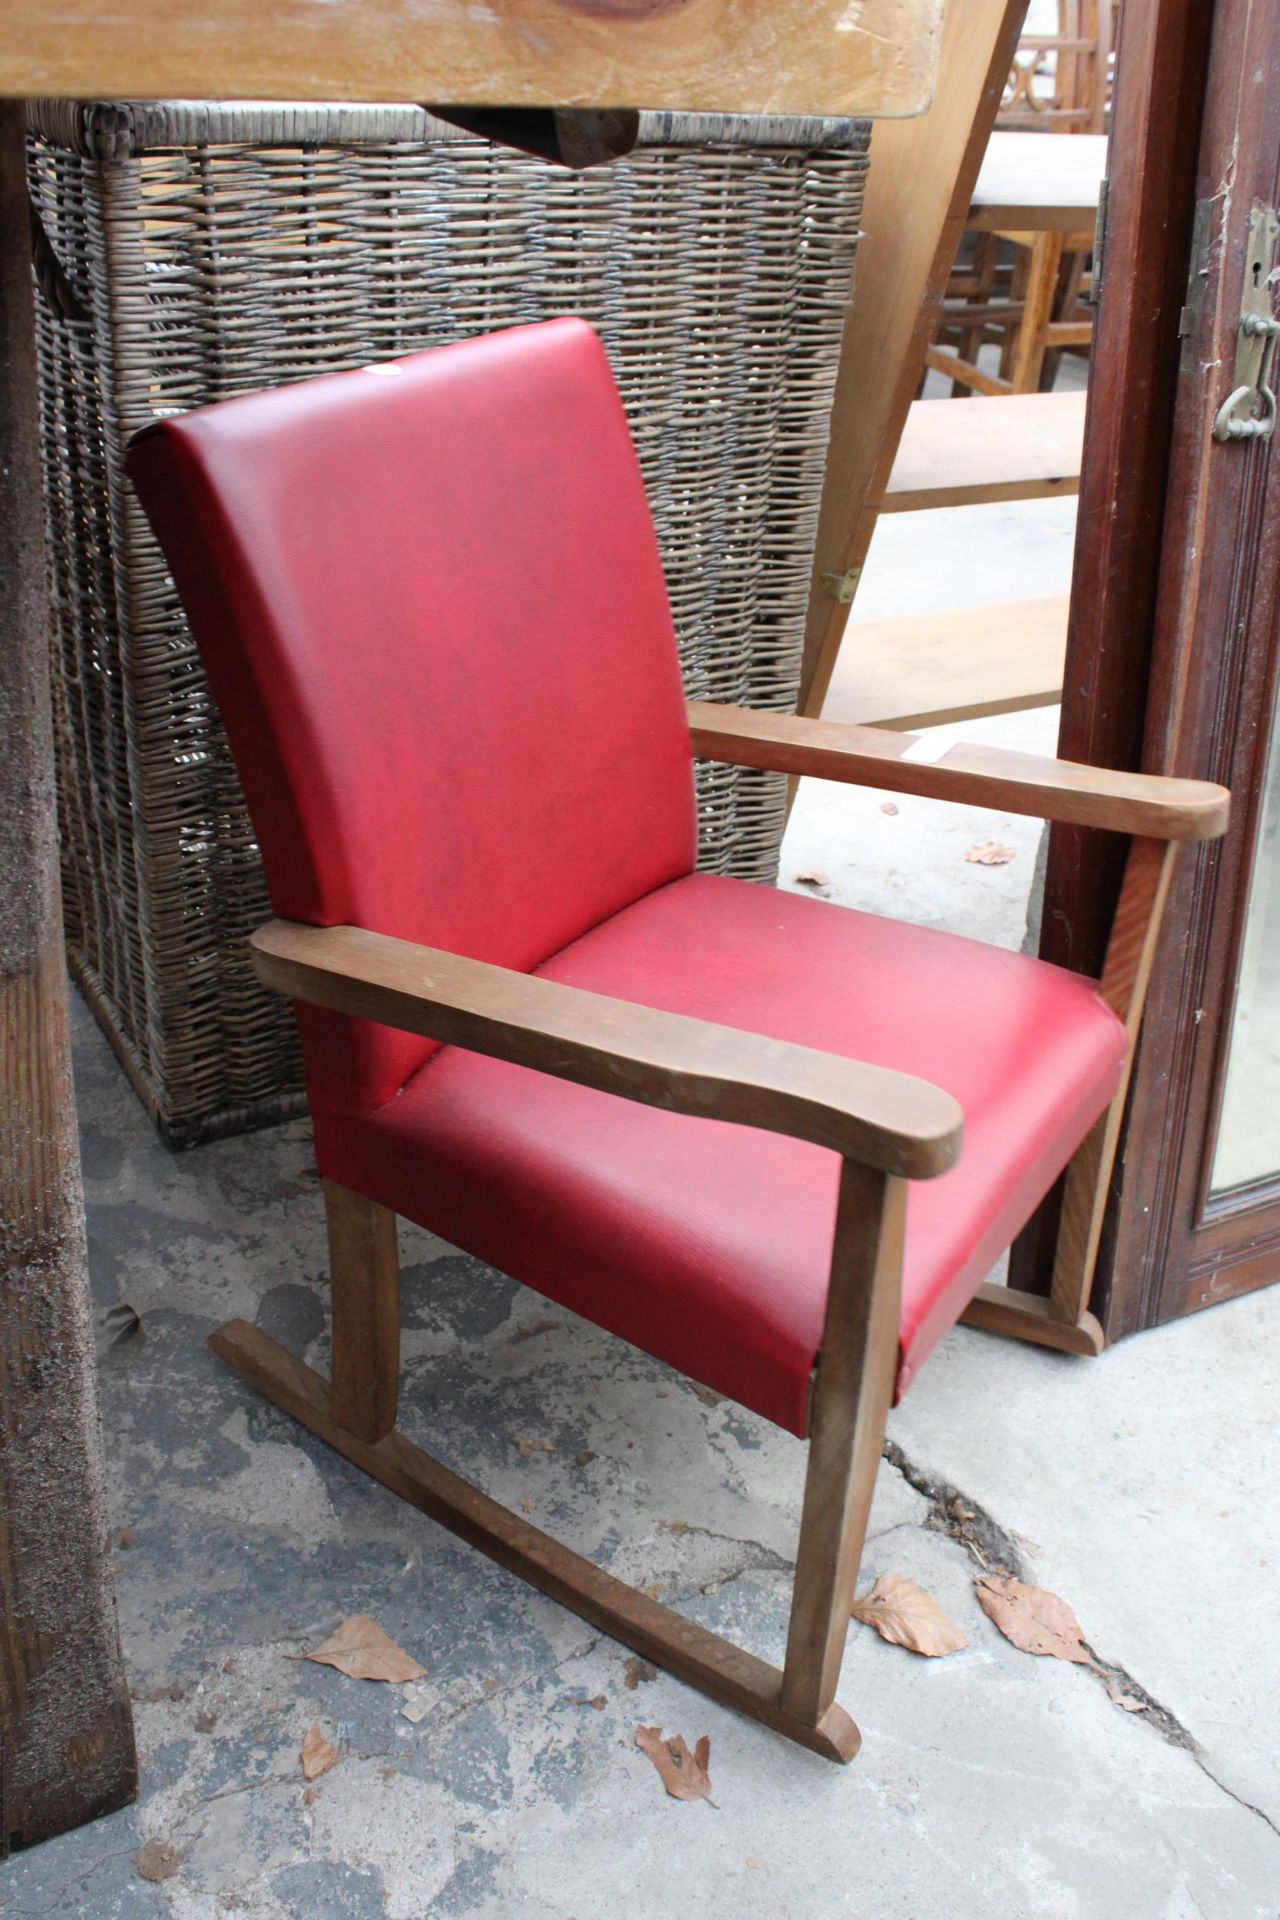 A MID 20TH CENTURY CHIDS ROCKING CHAIR - Image 2 of 2